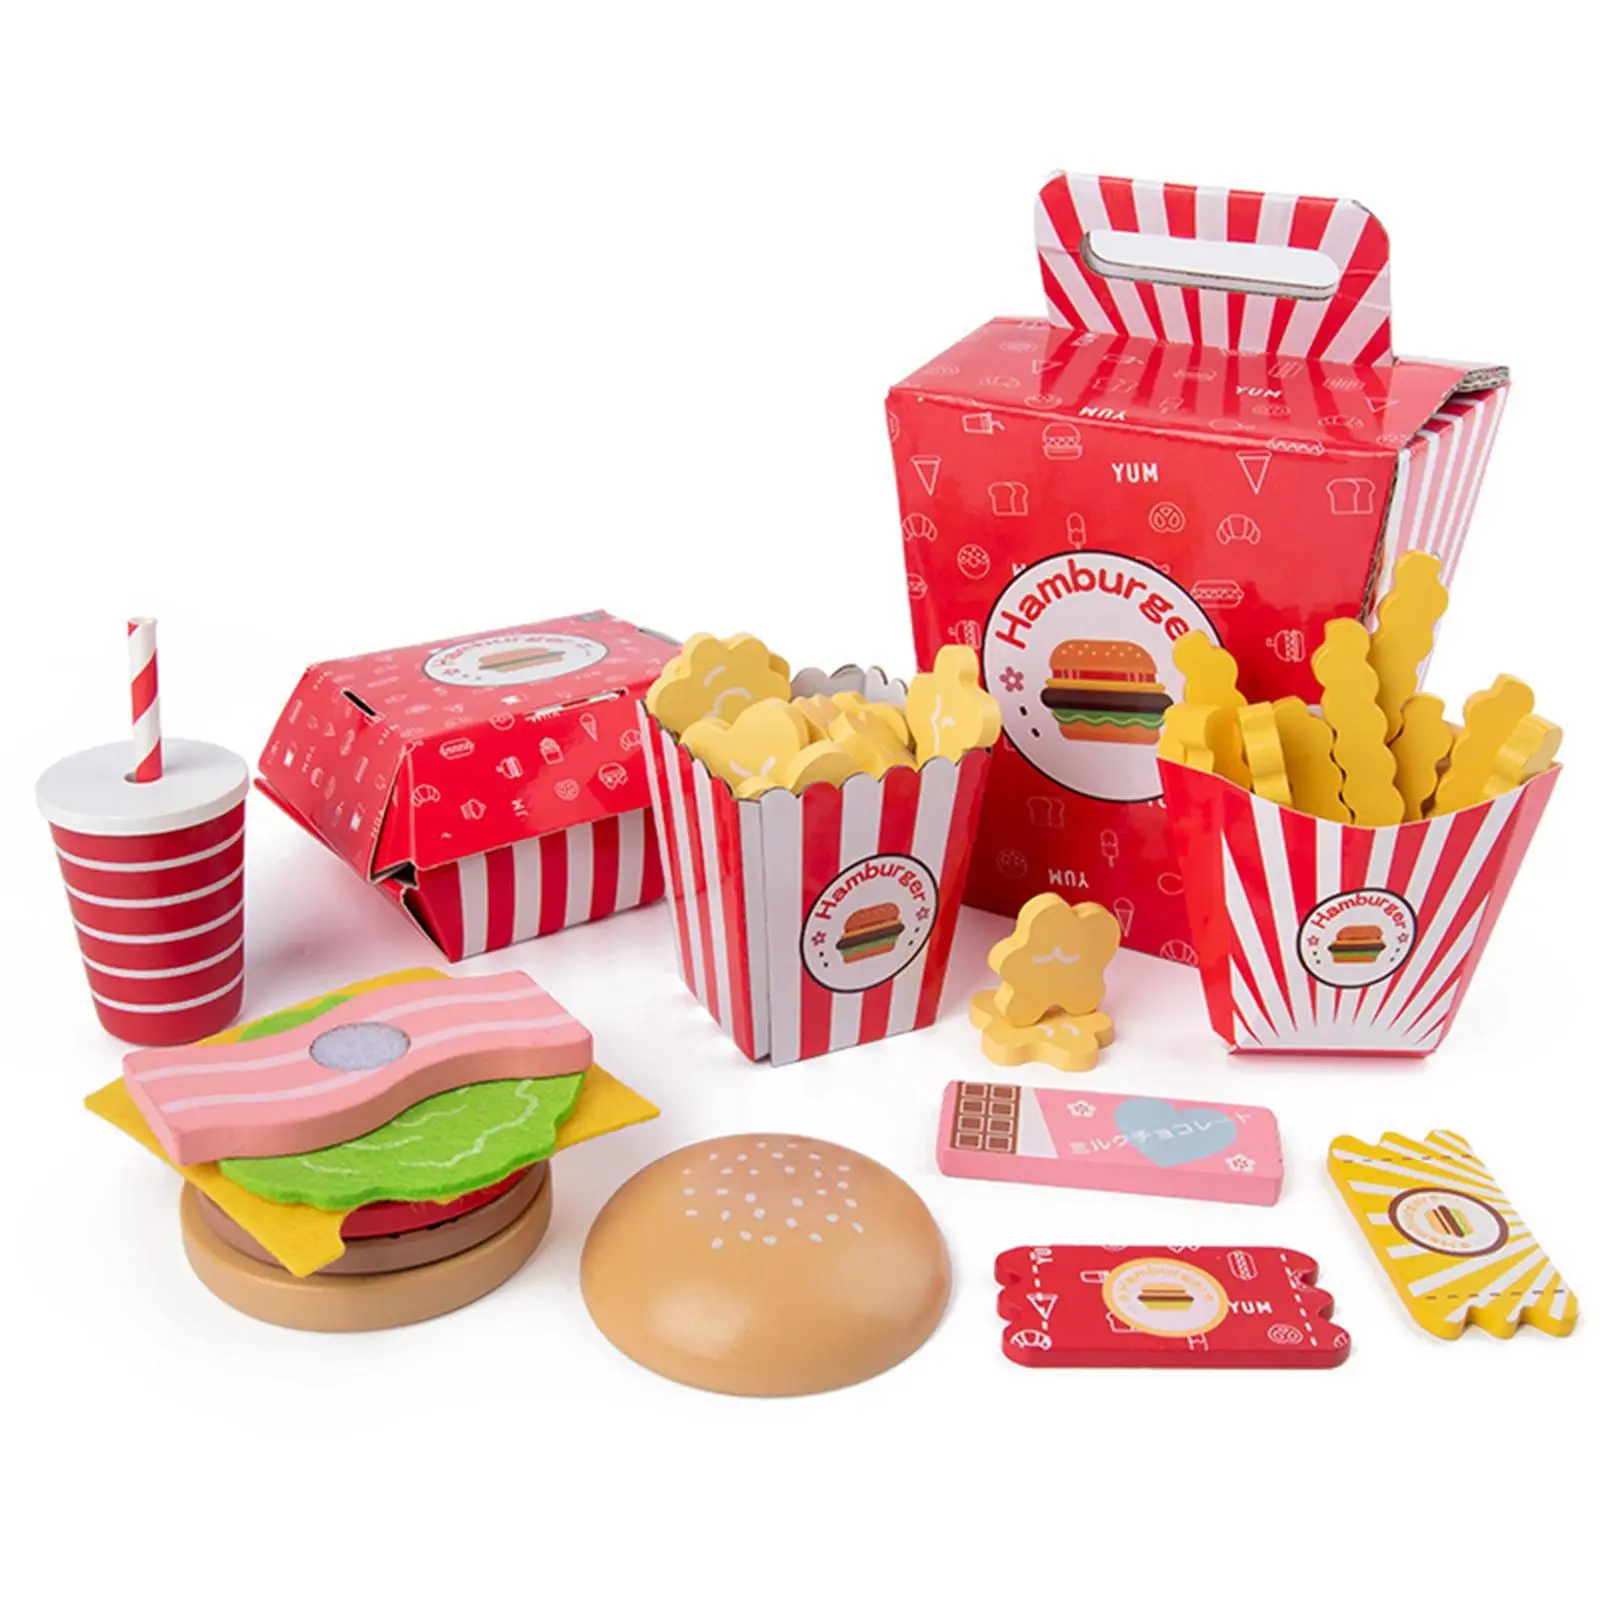 Wooden Pretend Play Play Food Toy Set Fast Food Hamburger Kids Toddlers